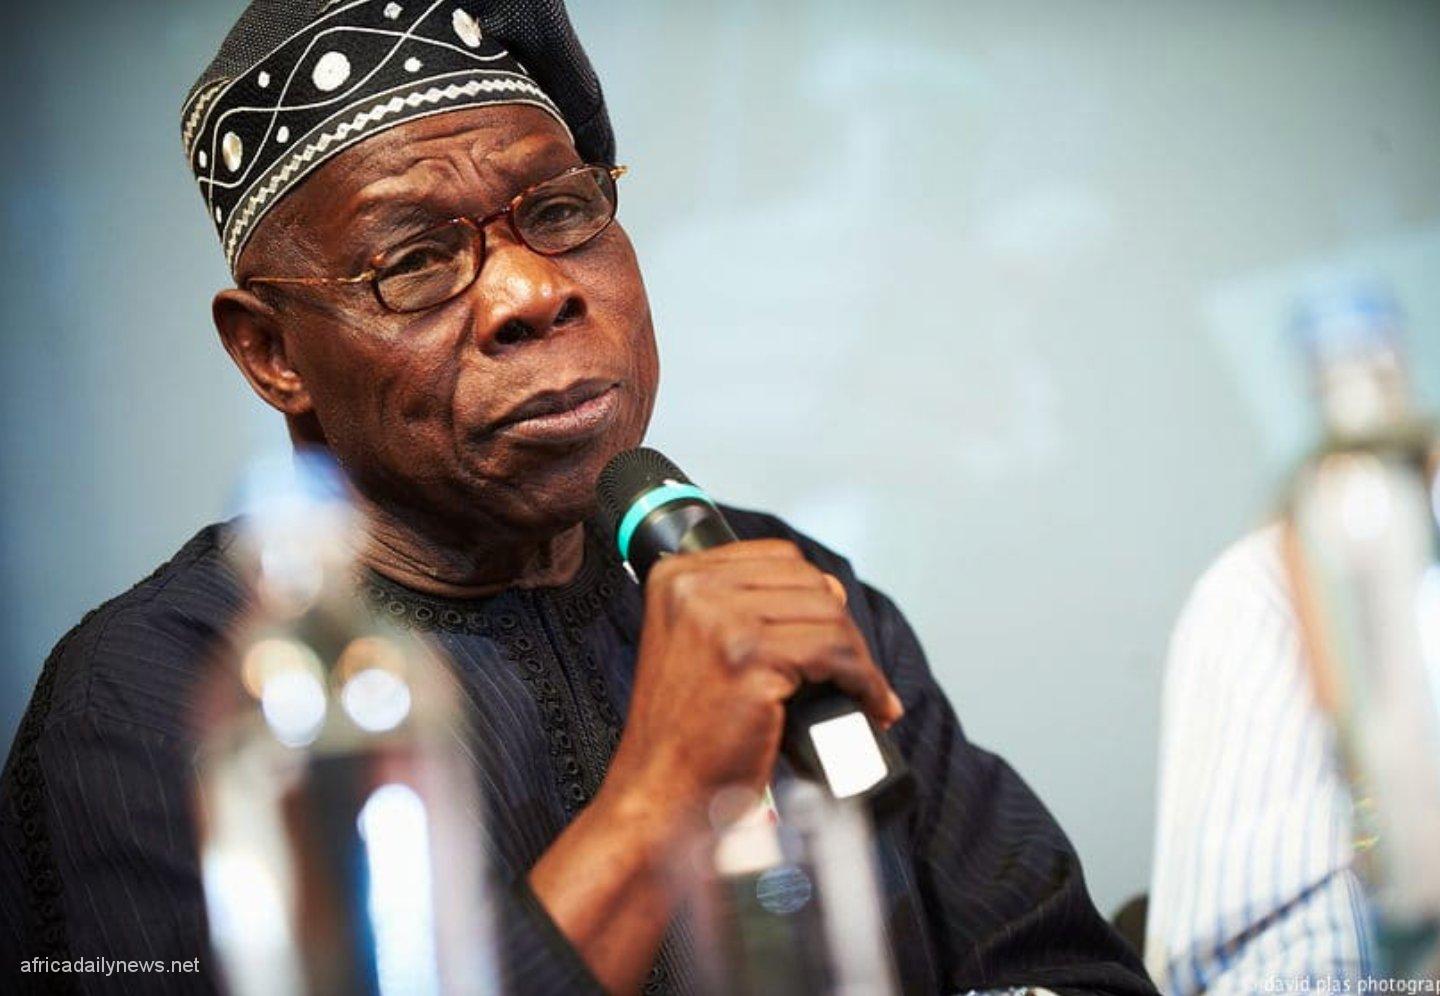 Everything About My Life Happened By Accident — Obasanjo